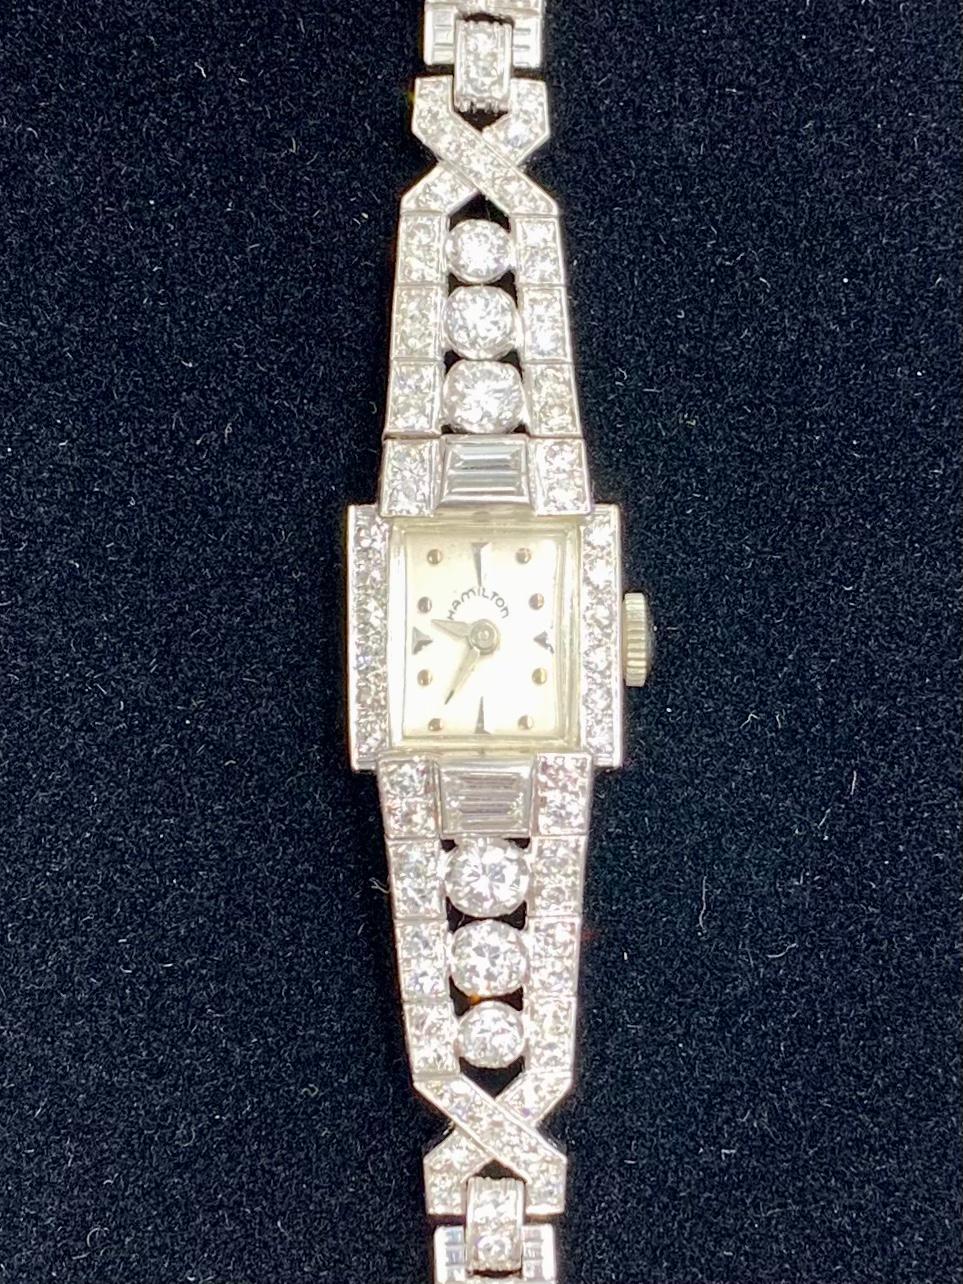 Elegant Art Deco period Hamilton platinum, 4.8 TCW diamond dress watch with a wide double row platinum and diamond bracelet band, high style X-form diamond details and substantial baguette and round cut diamond accents.
For nearly a century,